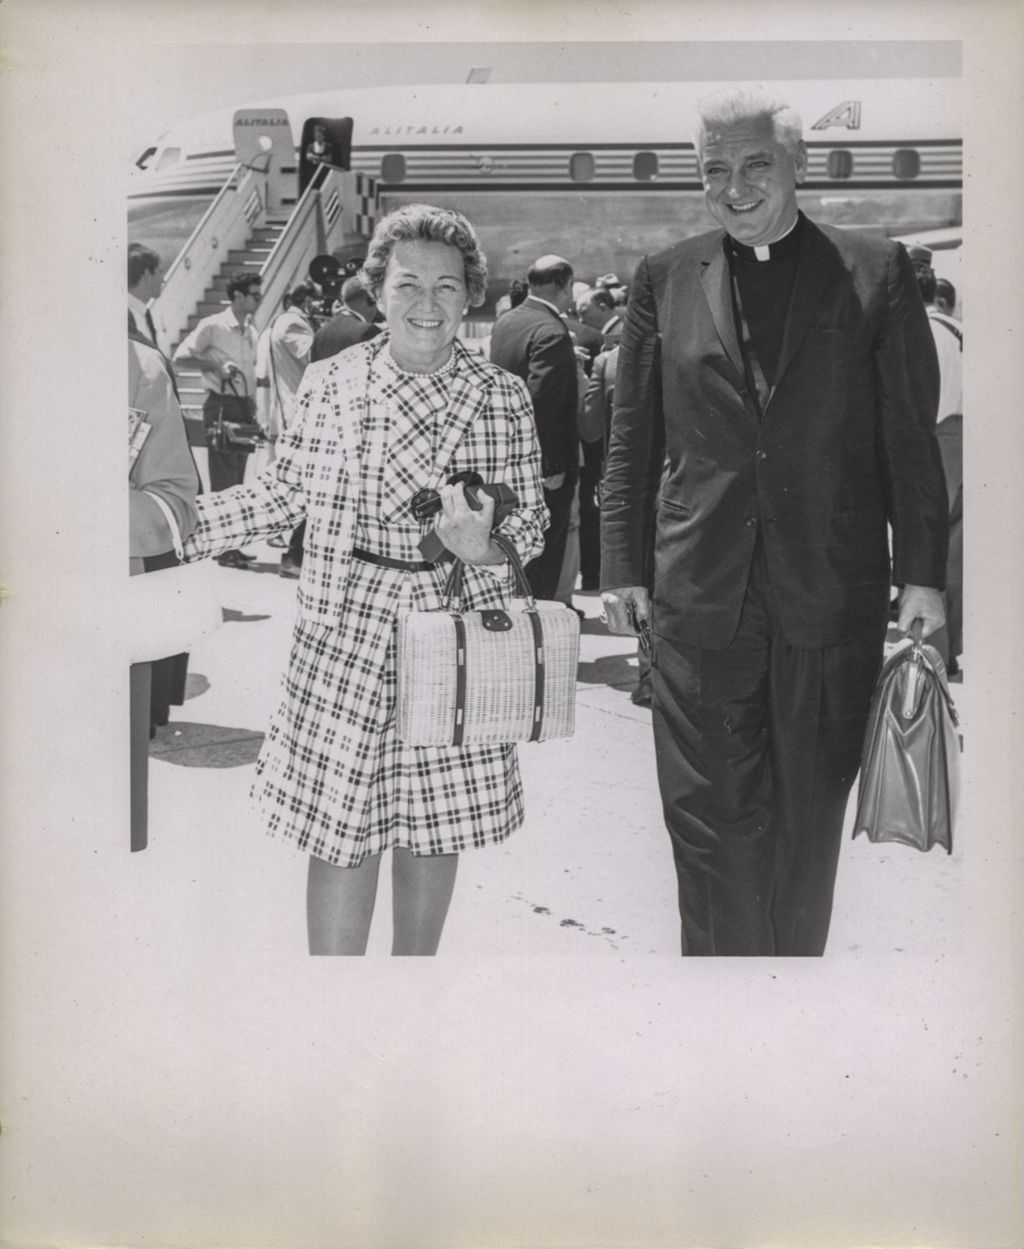 Miniature of Eleanor Daley and Bishop O'Donnell at Rome airport